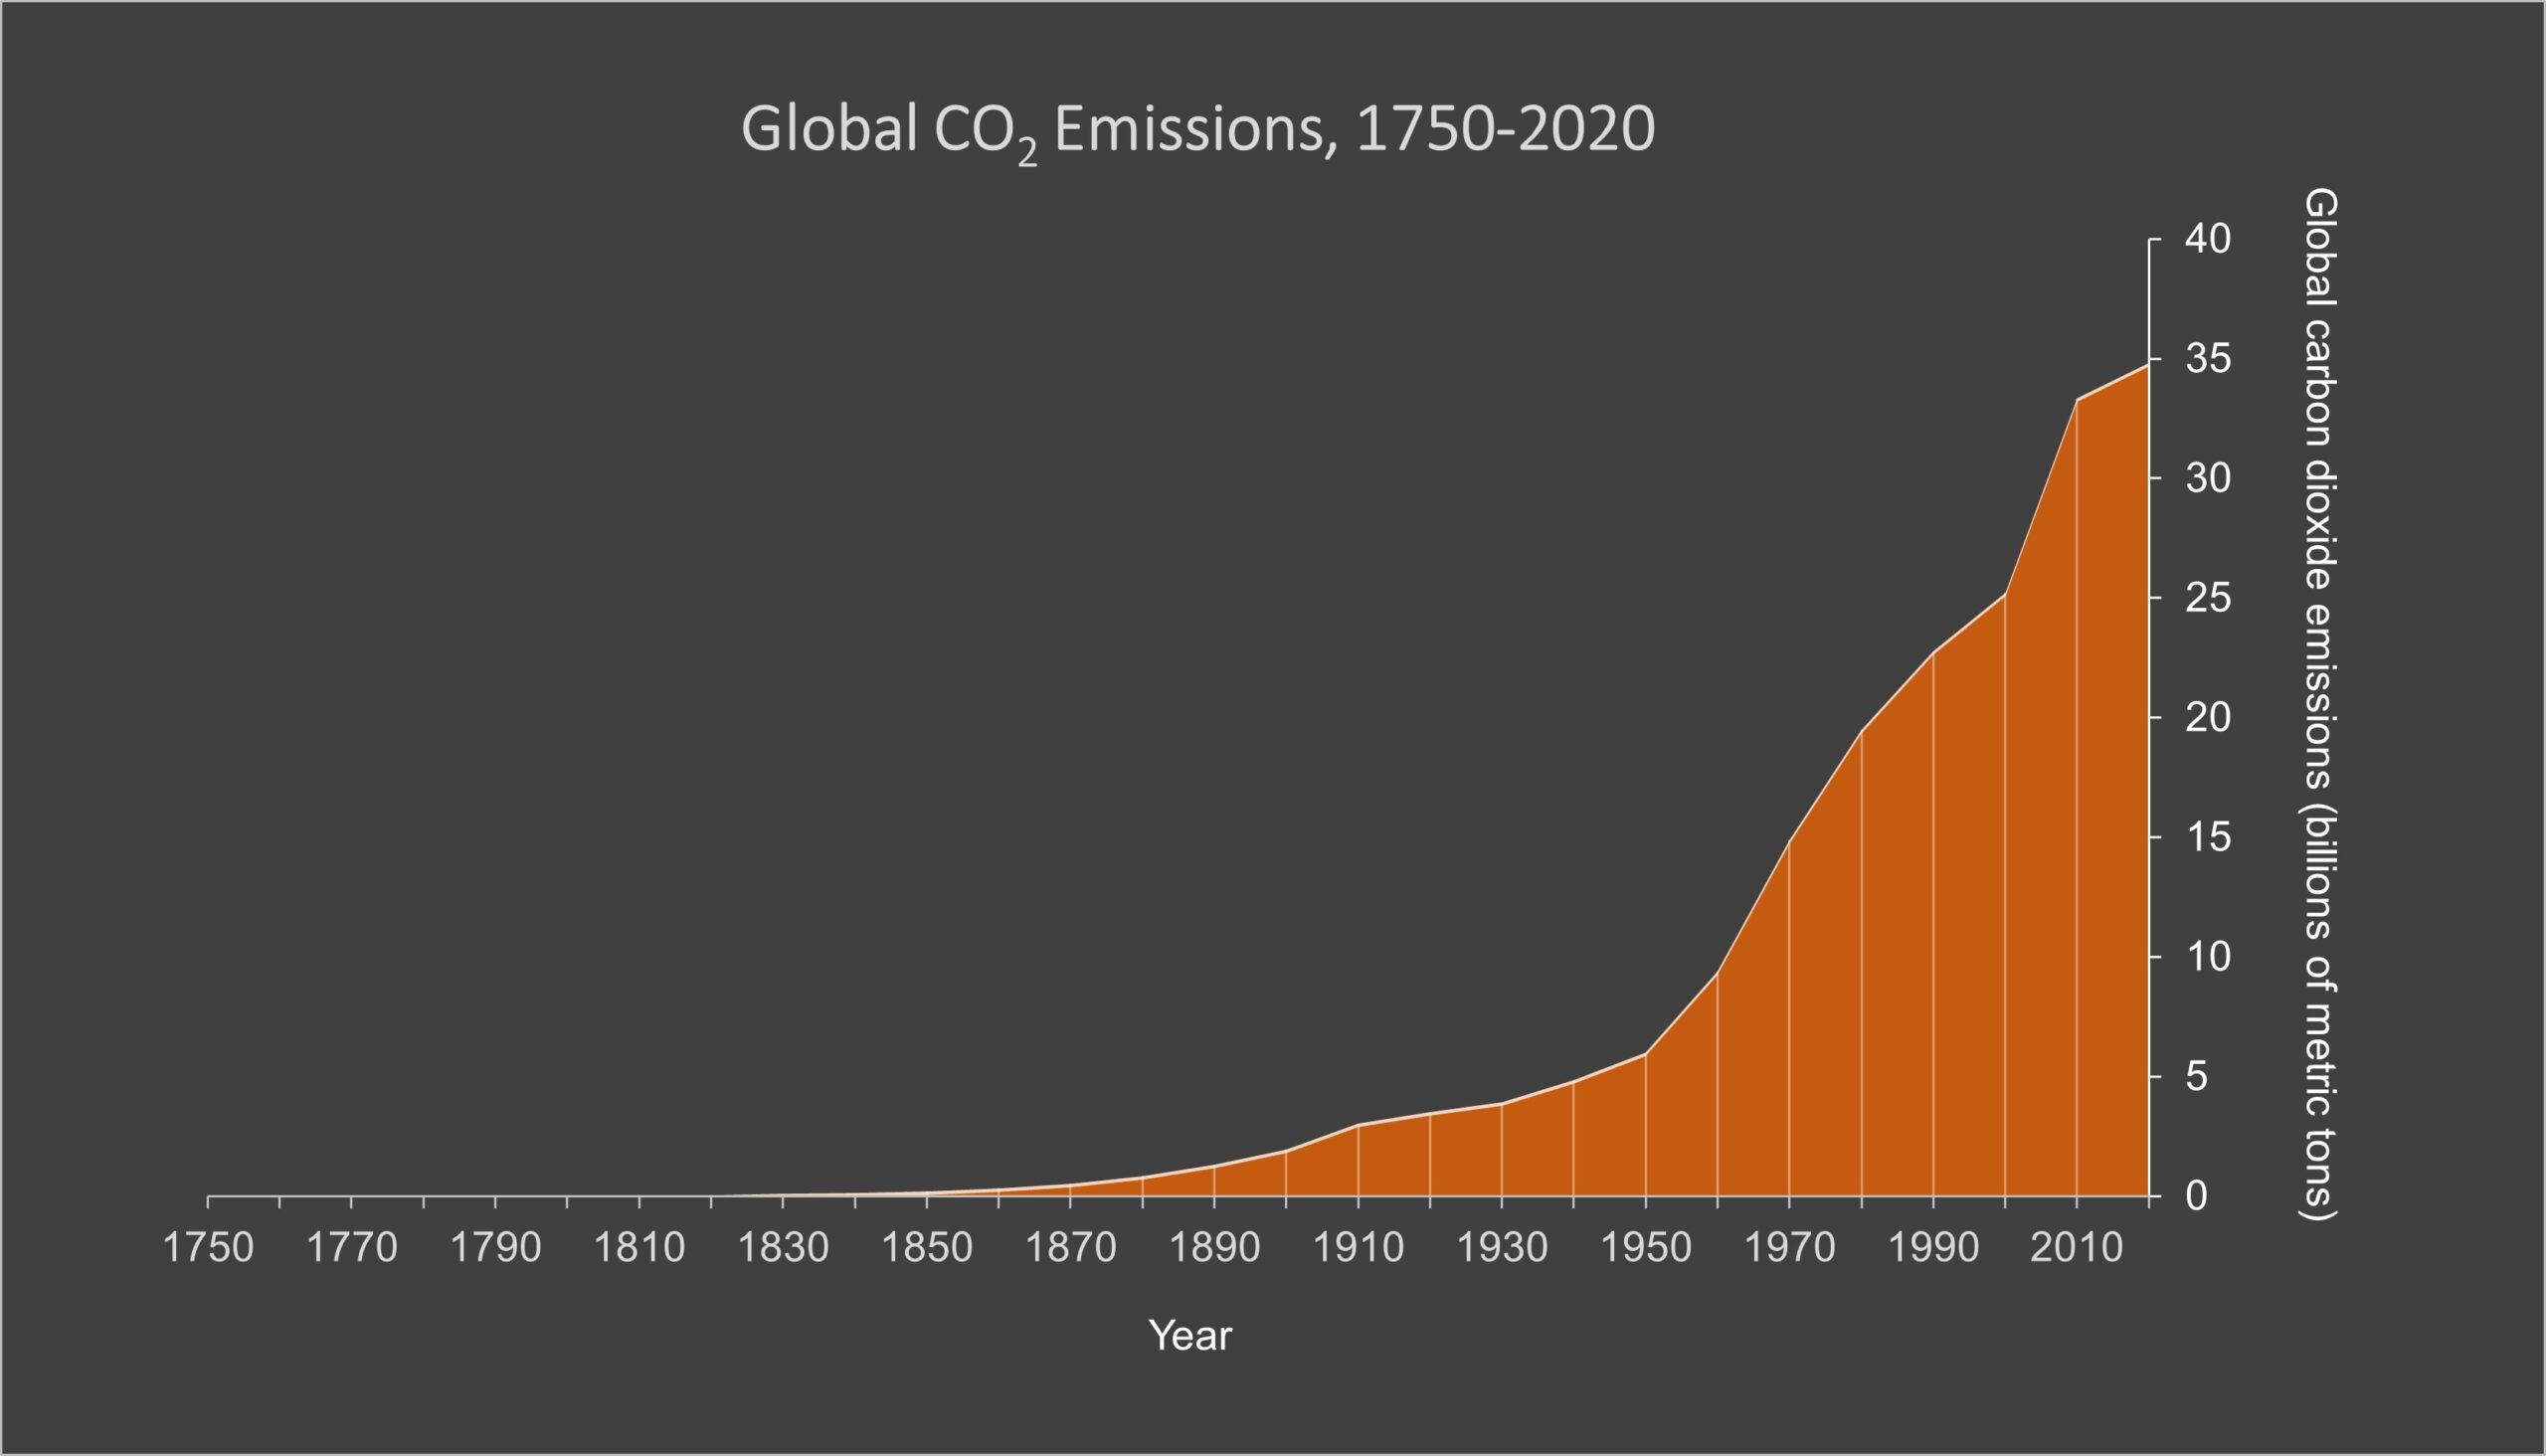 Graph showing global carbon dioxide emissions from 1750 to 2020